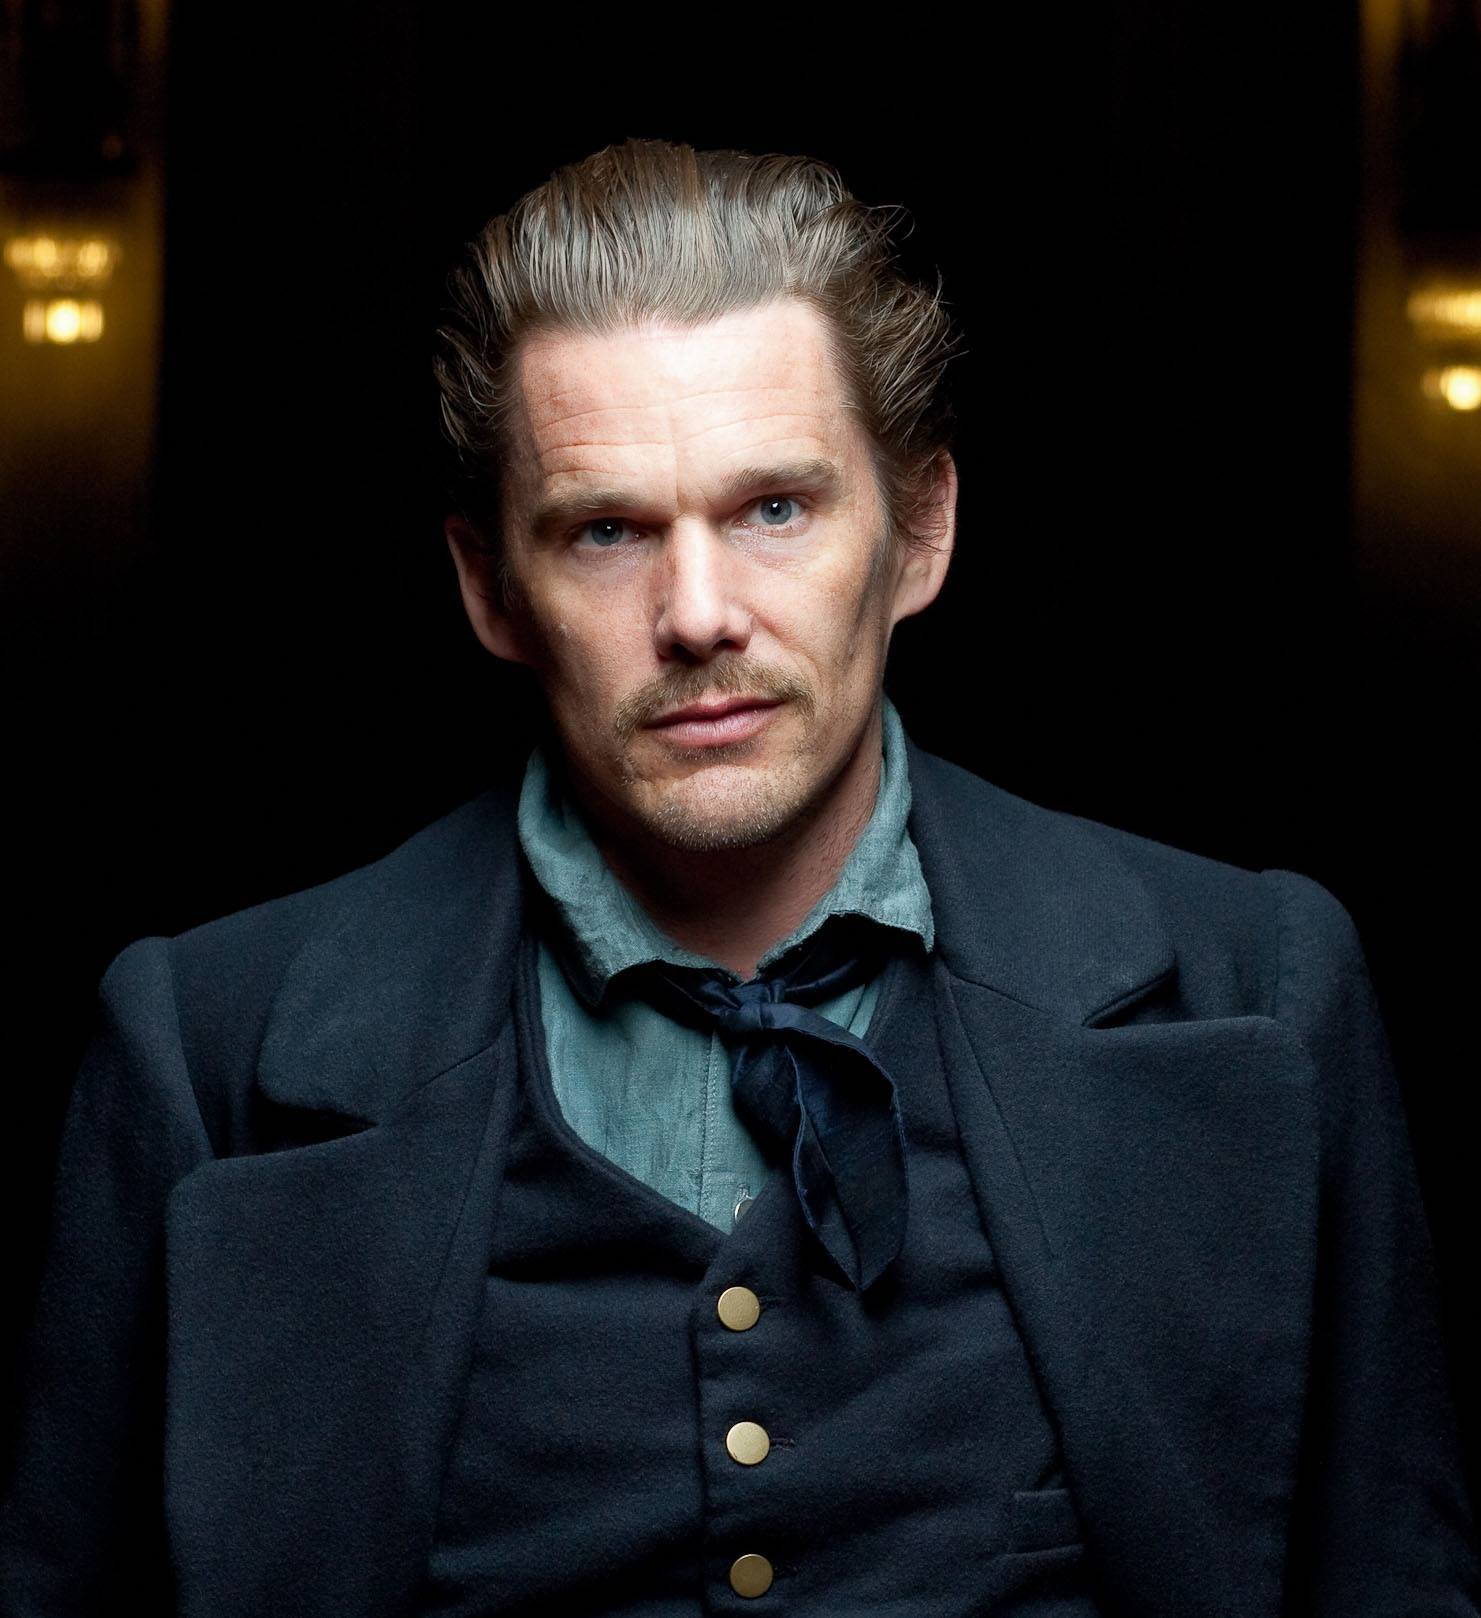 Ethan Hawke for THE ONE magazine